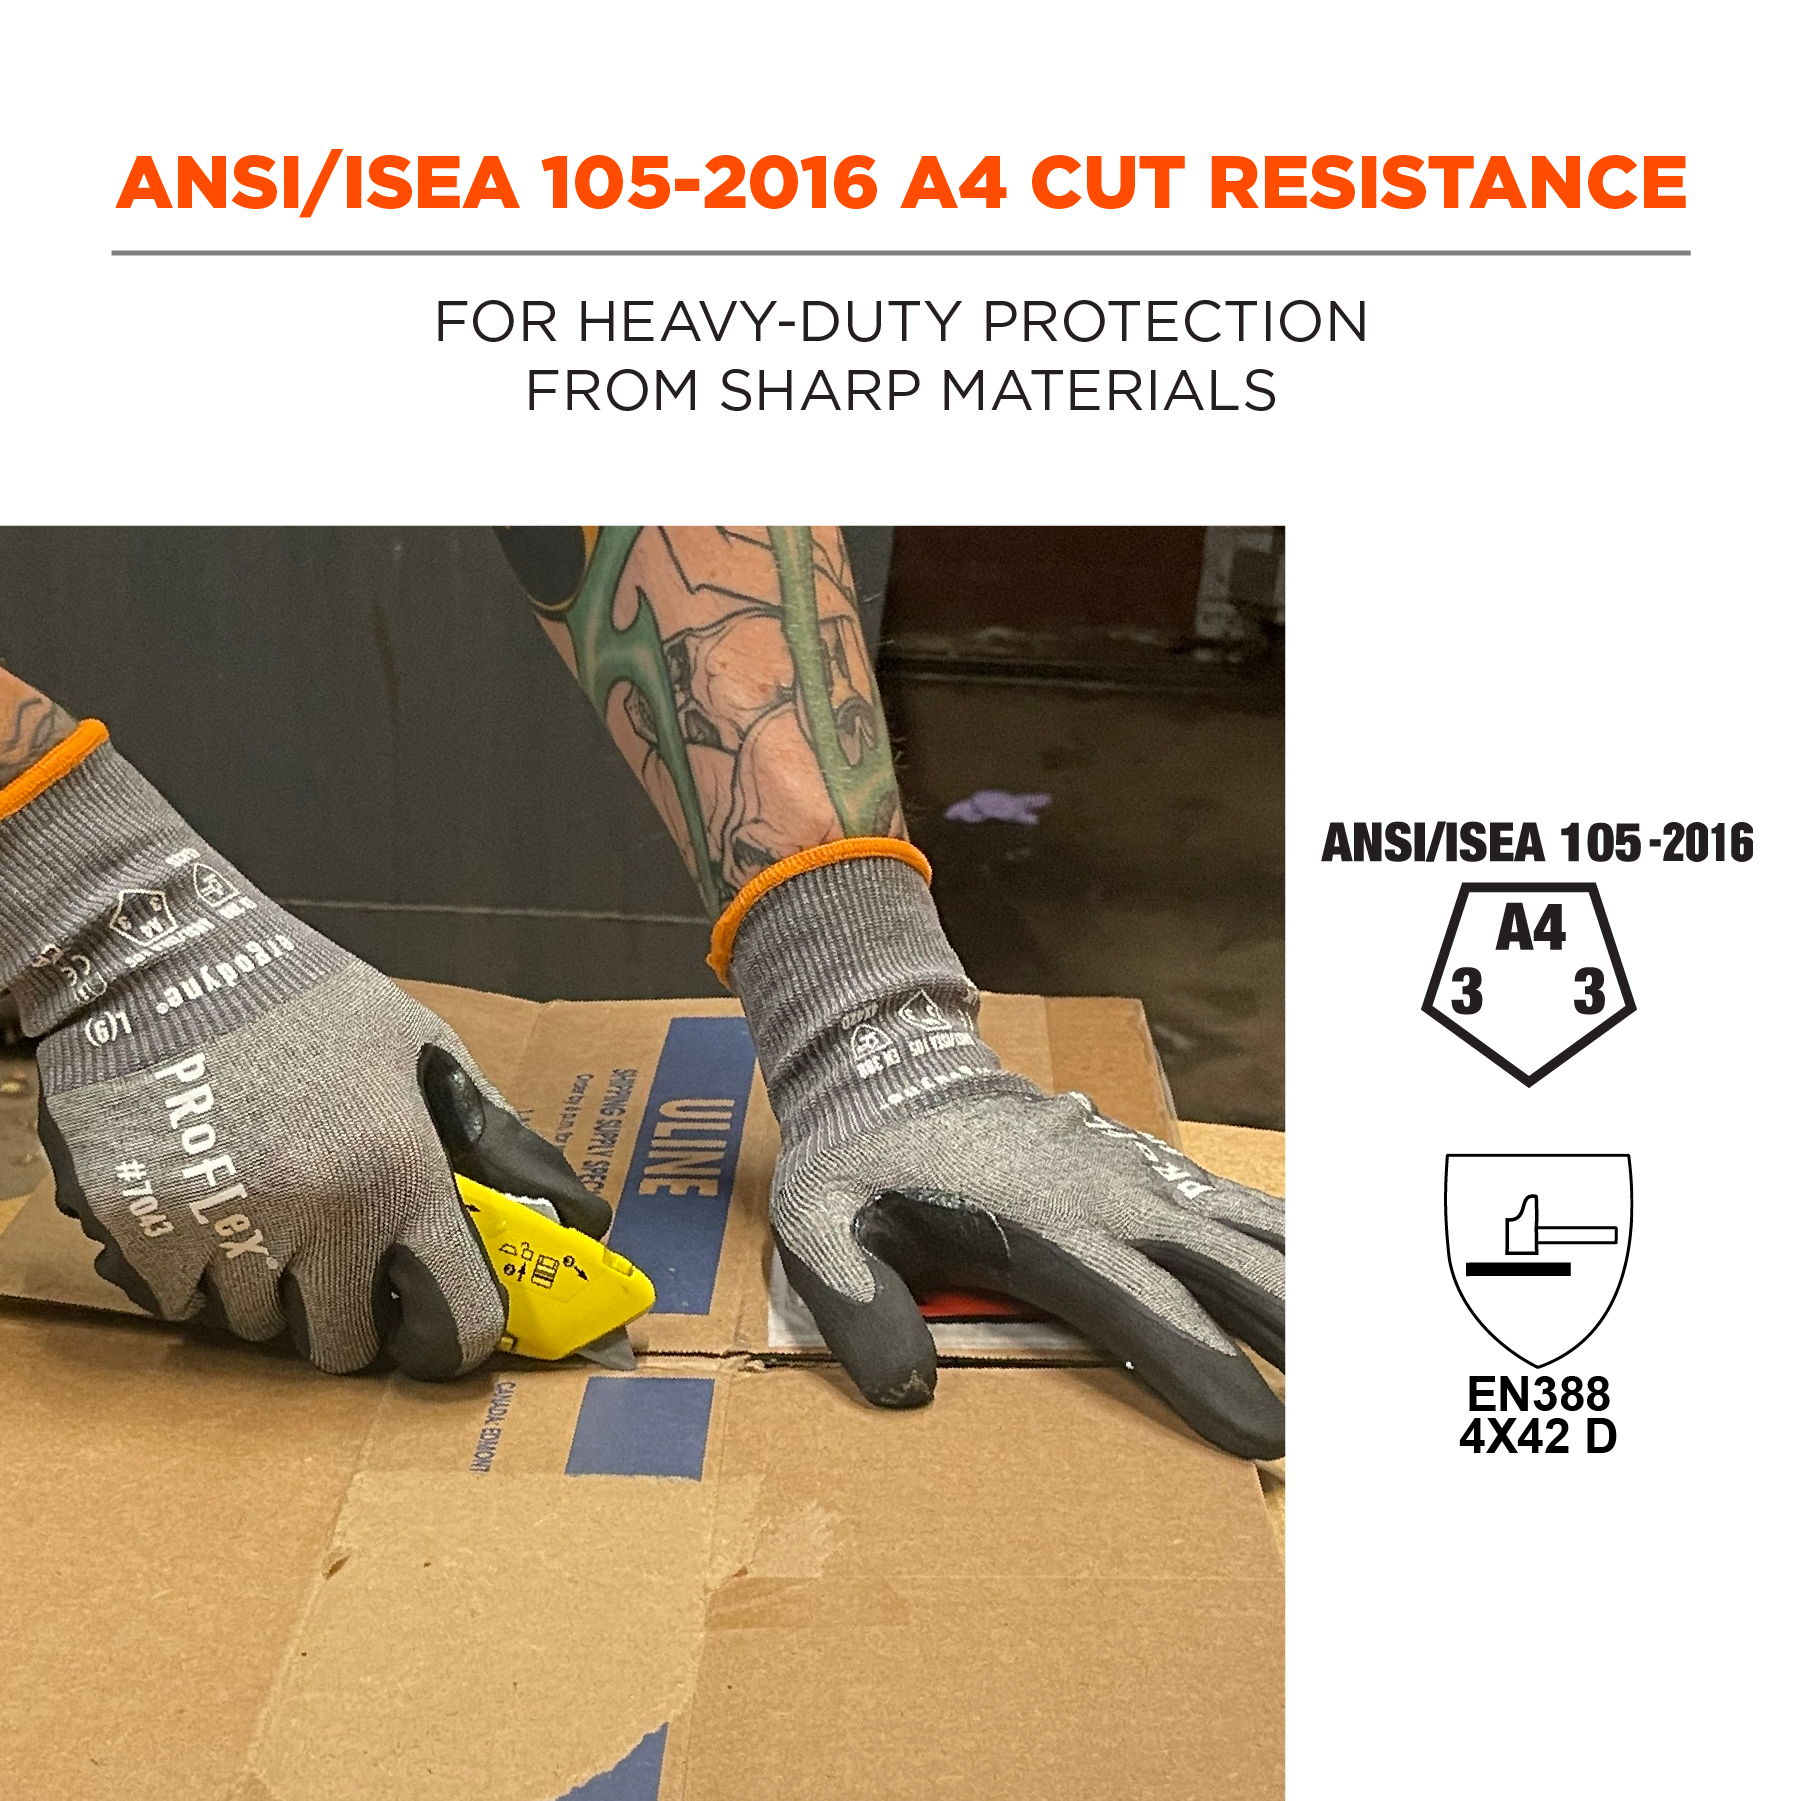 https://www.ergodyne.com/sites/default/files/product-images/10522-7043-nitrile-coated-cut-resistant-gloves-ansi-isea-105-2016-a4-cut-resistance-small.jpg